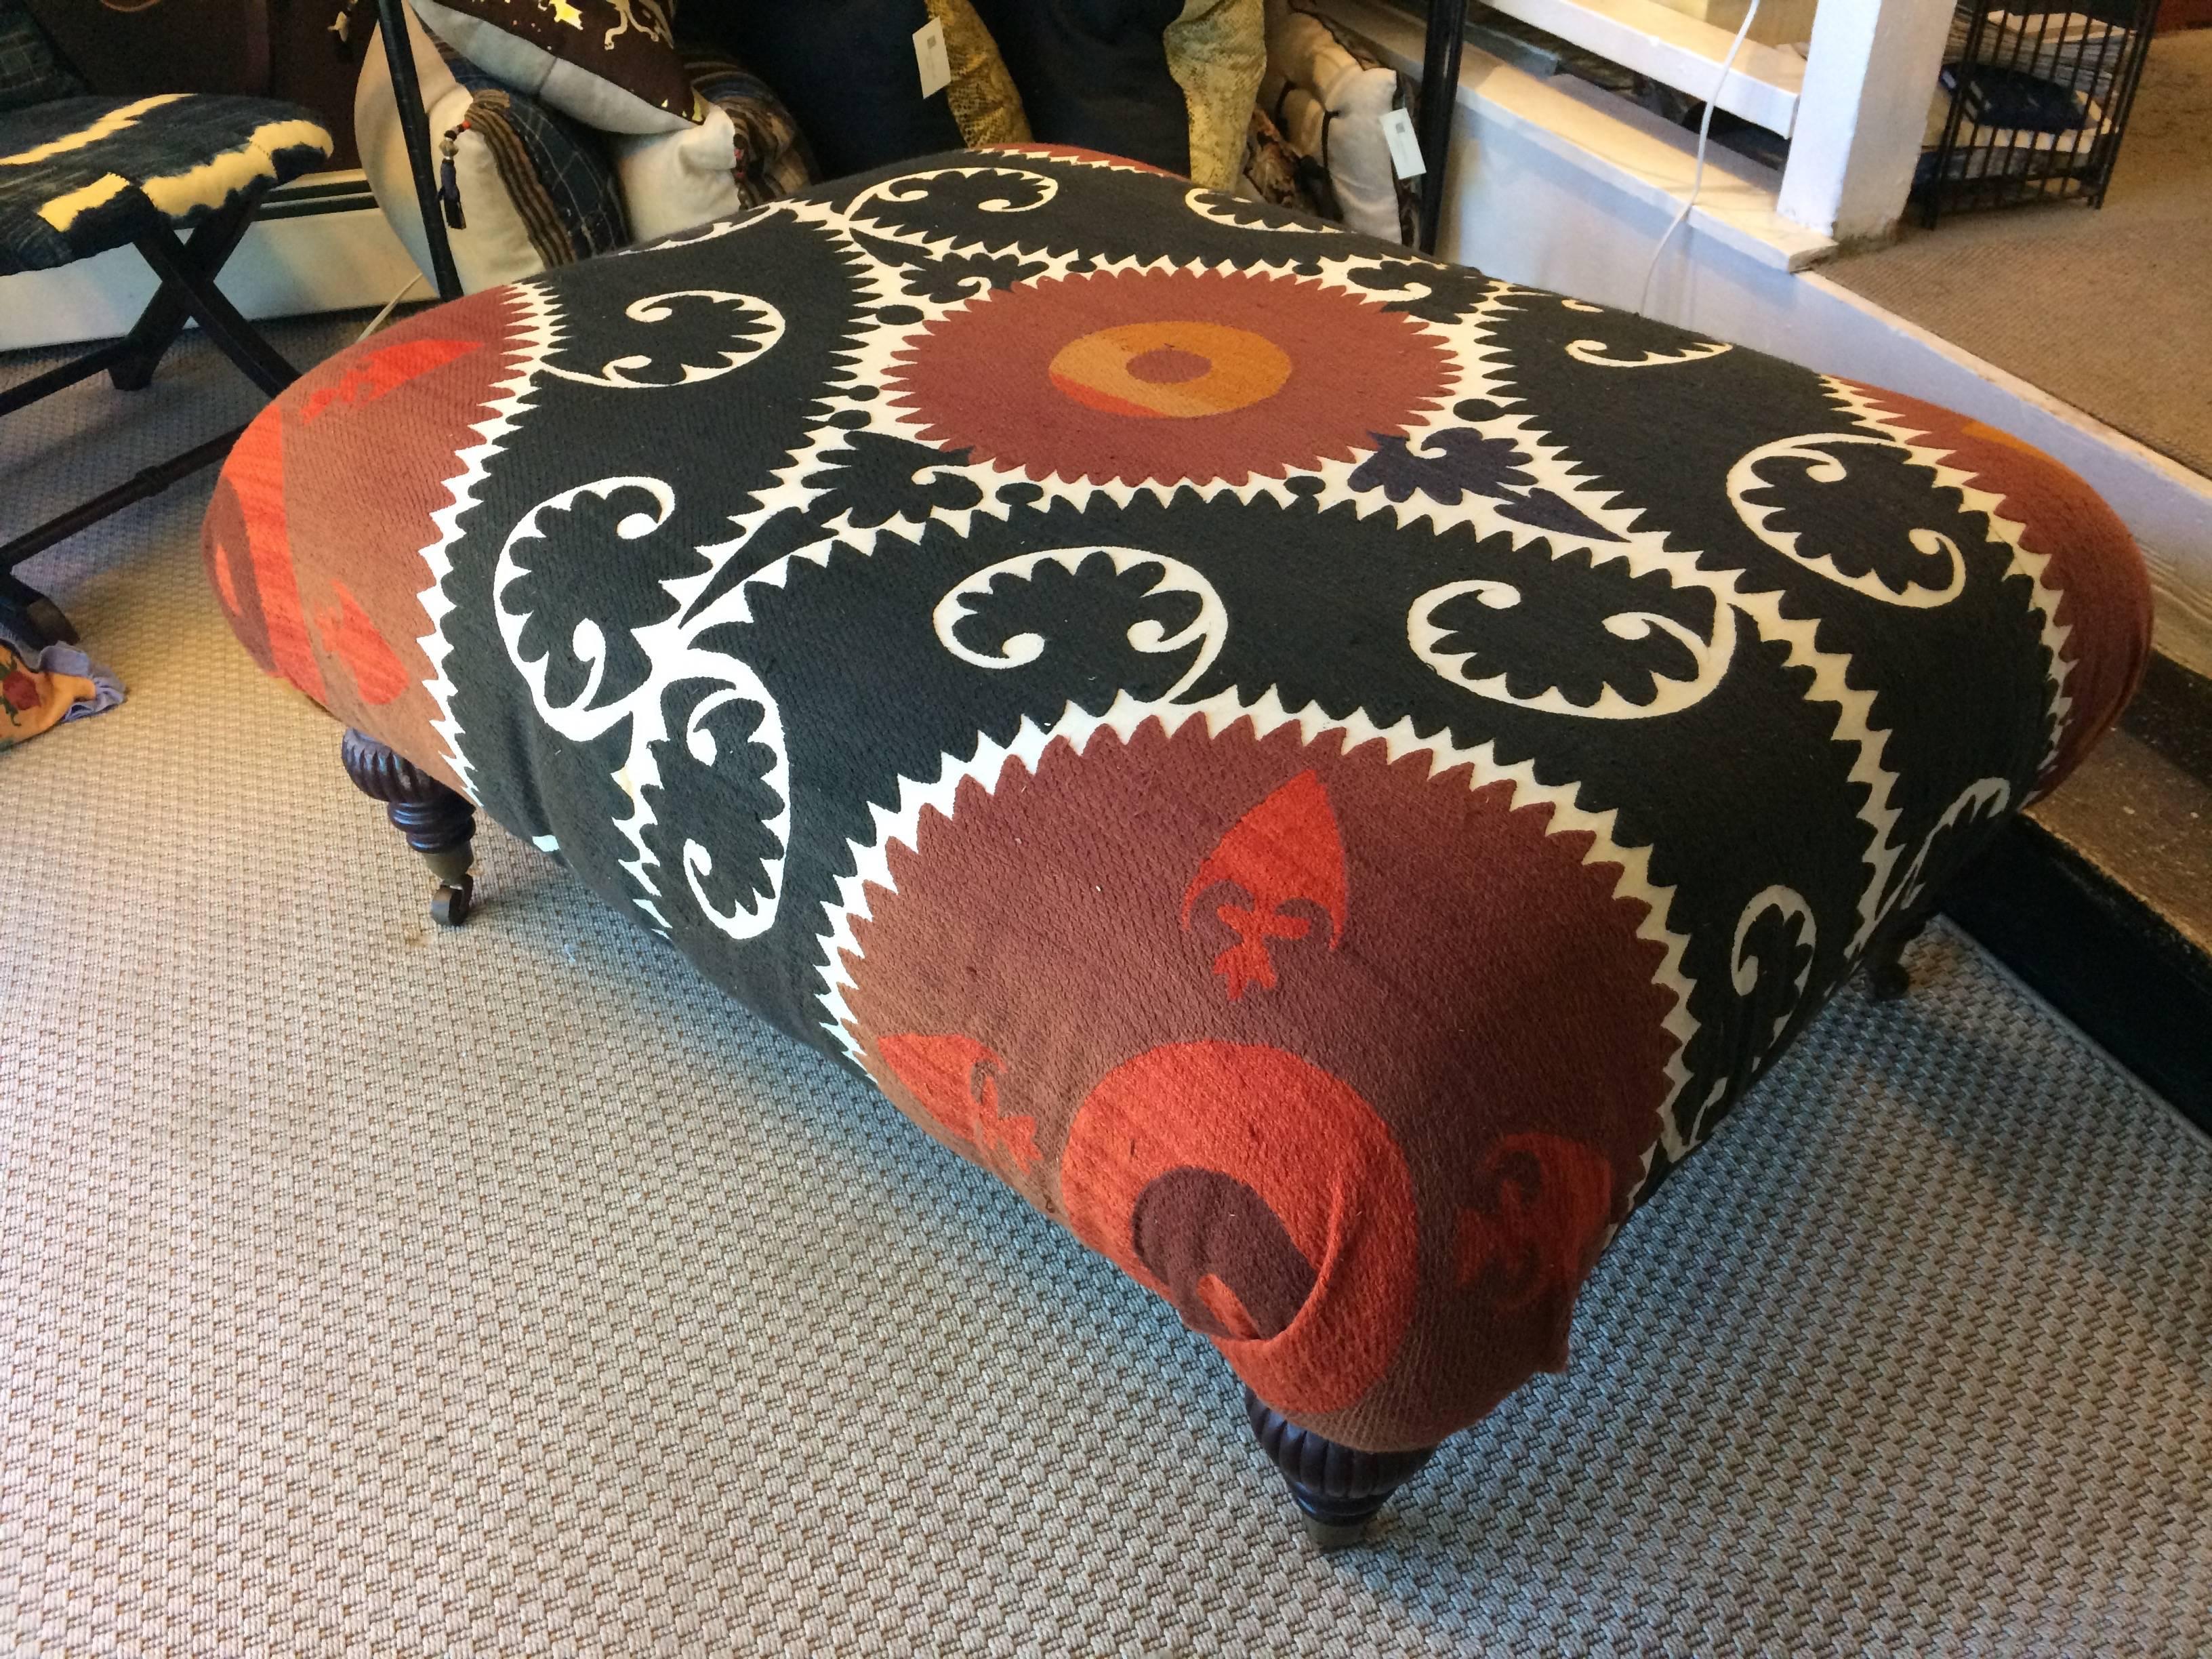 A large comfy ottoman or coffee table having wooden turned legs and fabulously graphic upholstery that's an antique central Asian dowry cloth, handmade in black, white, and two shades of orange/red.